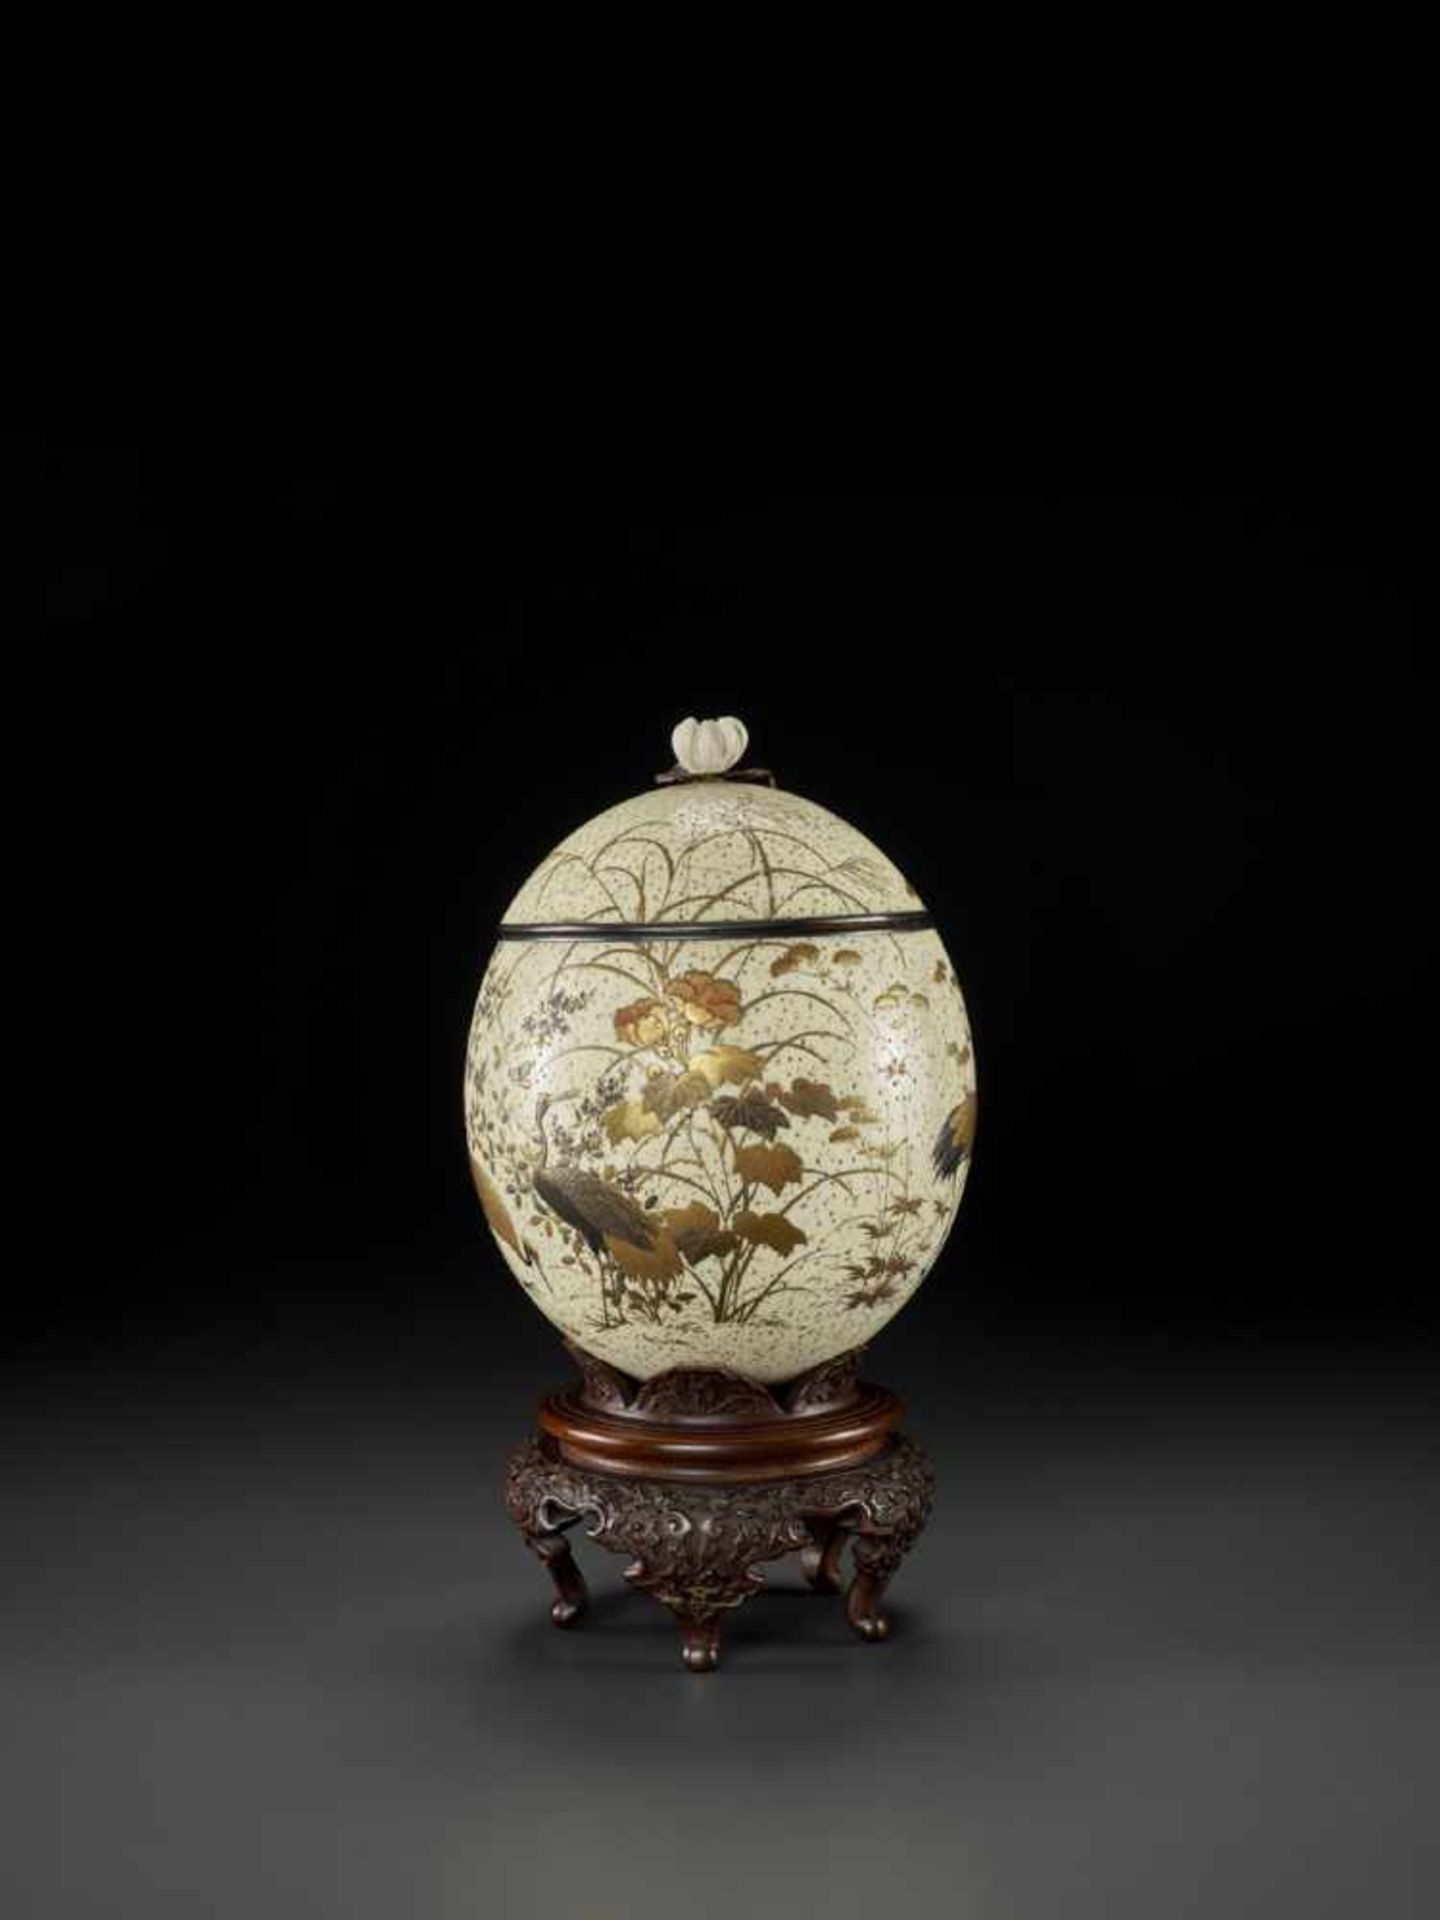 A FINELY LACQUERED OSTRICH EGG Japan, late 19th century, Meiji period (1868-1912)The speckled egg is - Bild 2 aus 10